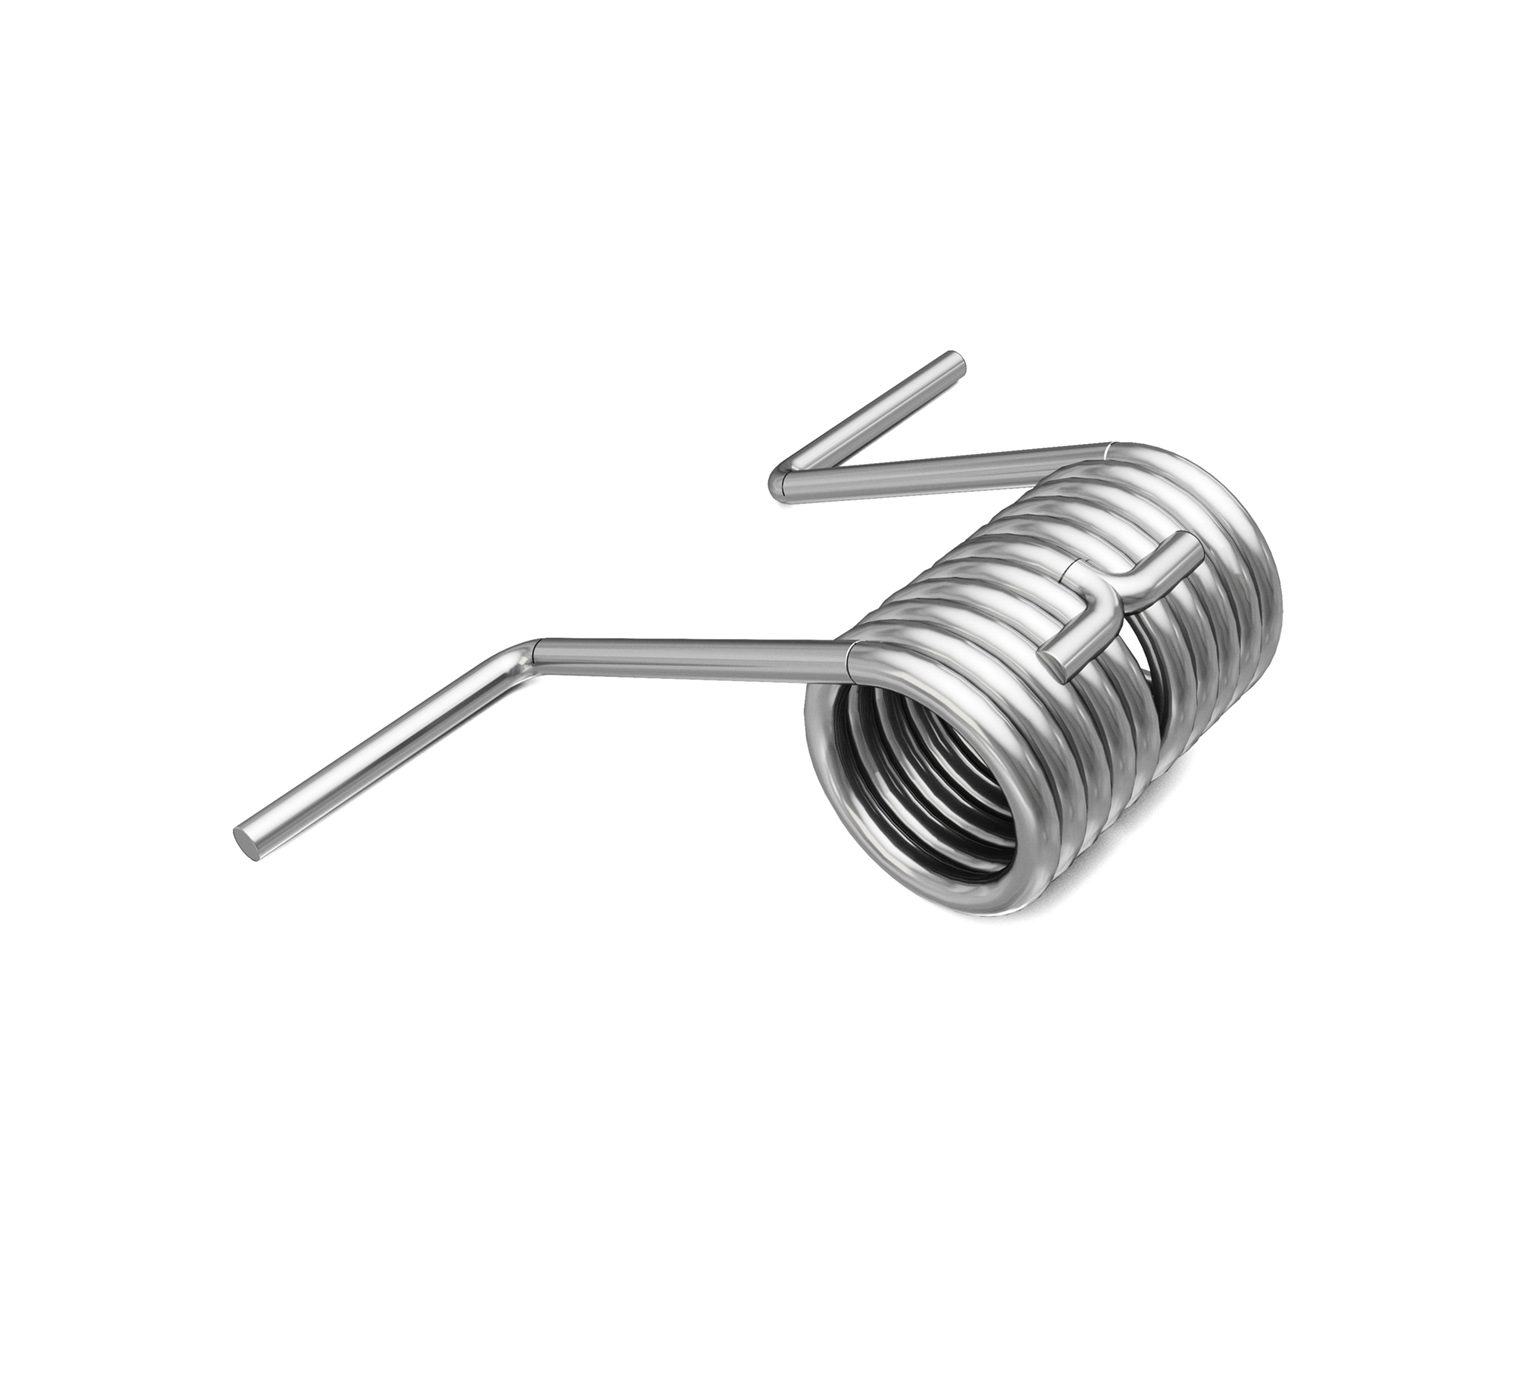 1011344 Stainless Steel Spring - 0.577 ID x 1.813 in alt 1